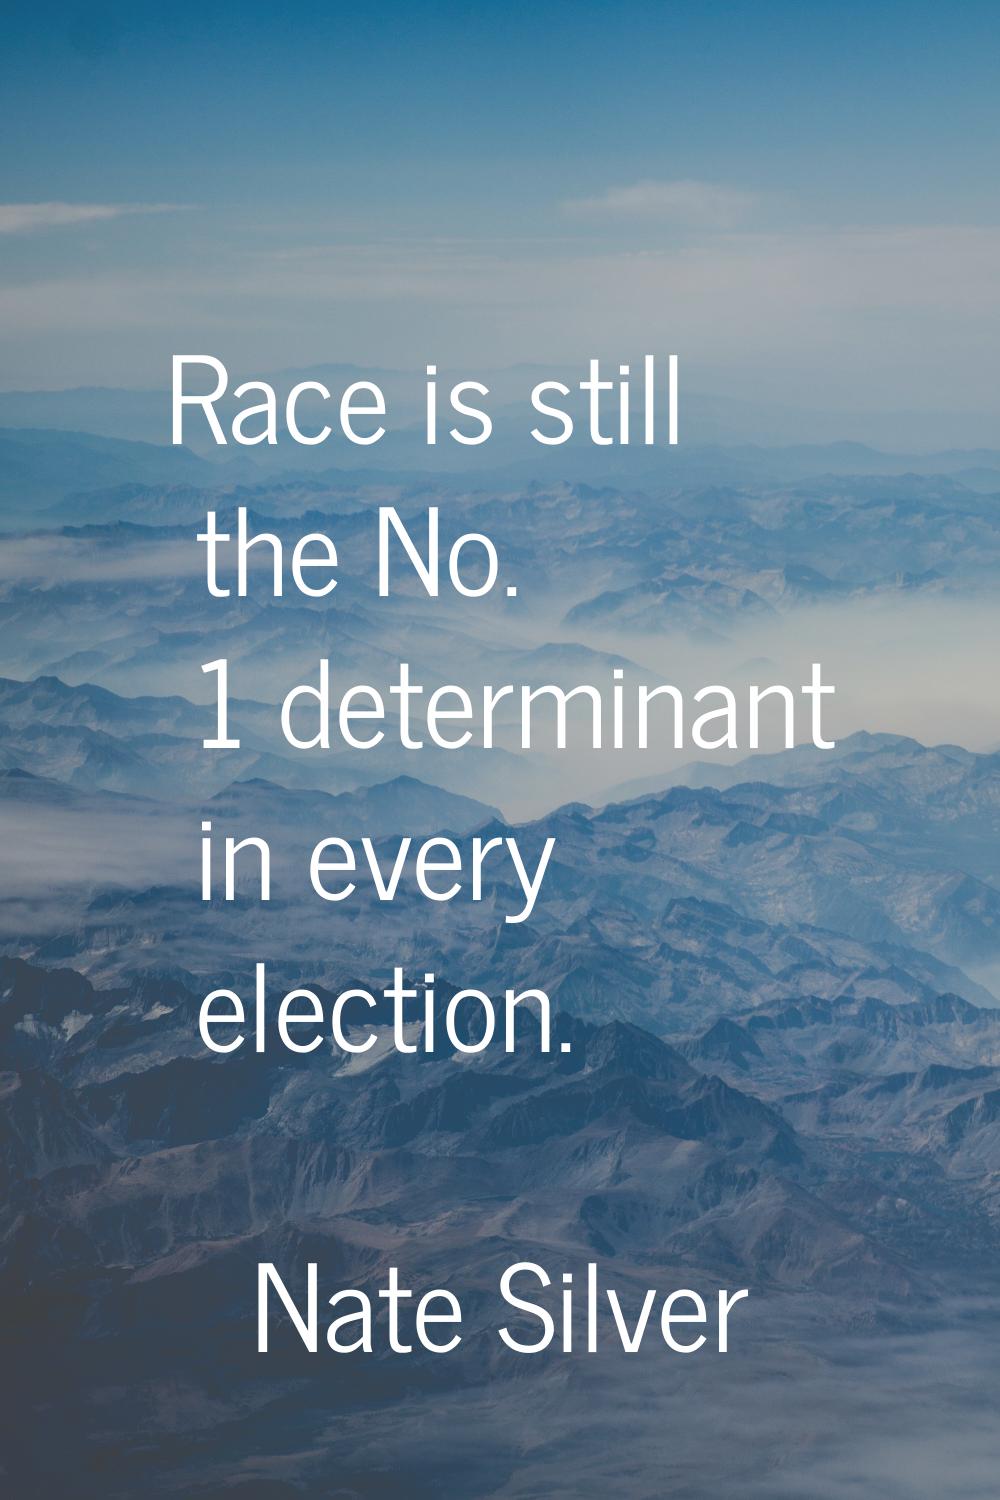 Race is still the No. 1 determinant in every election.